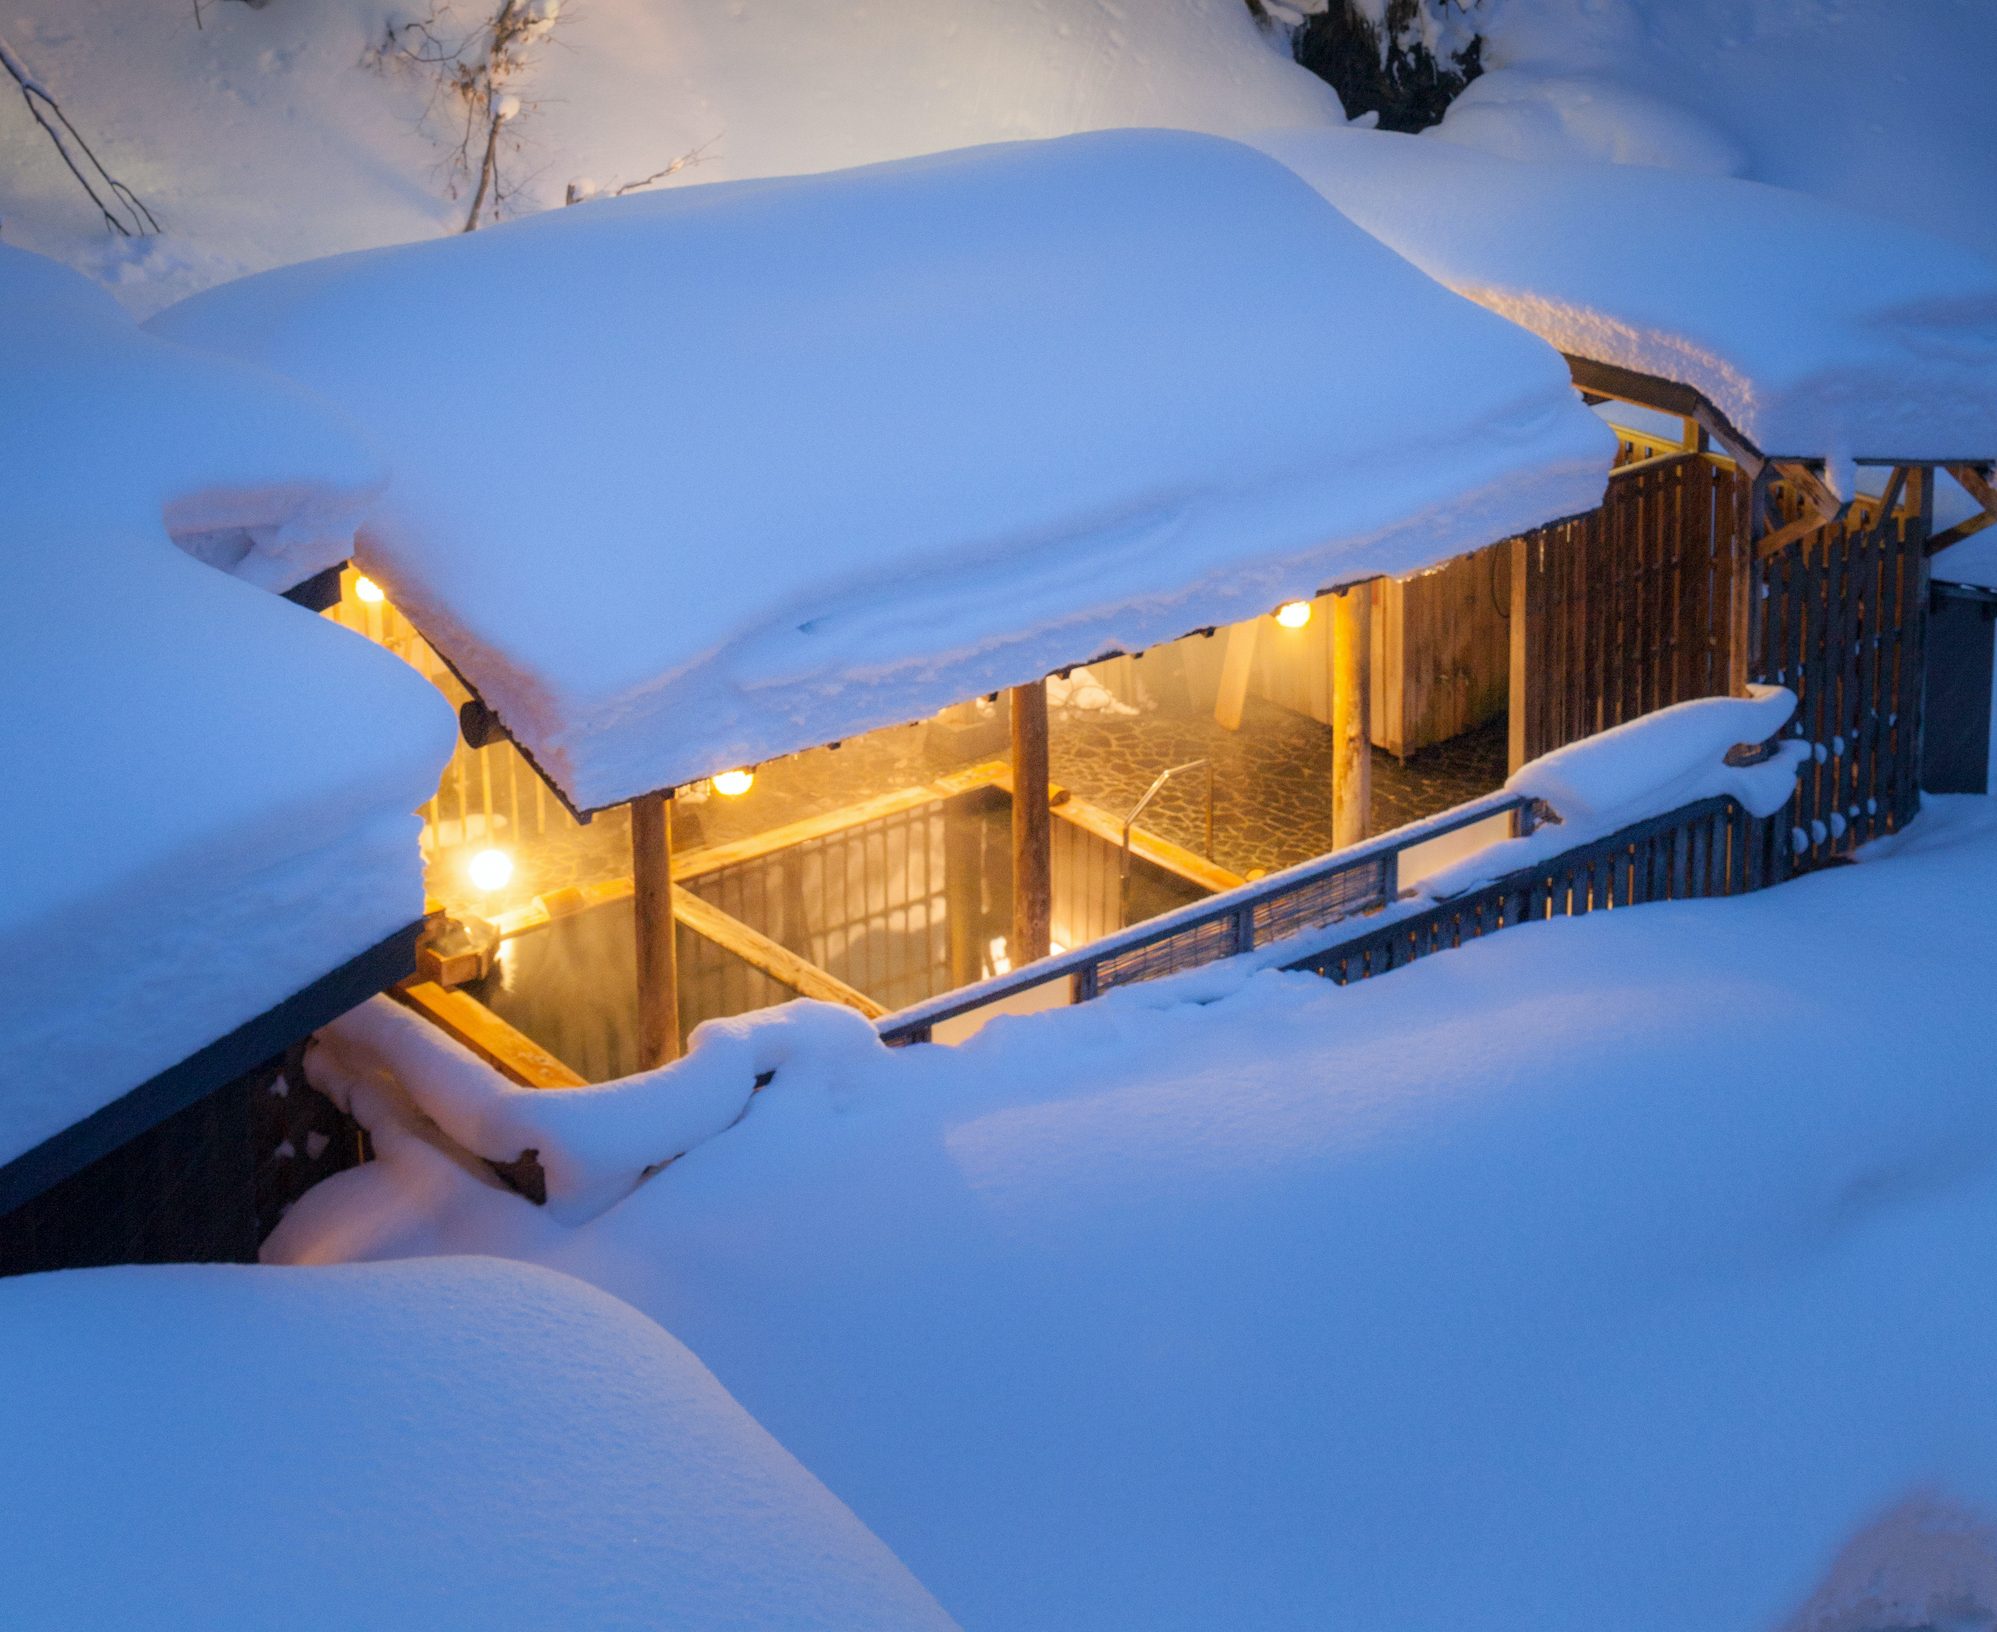 Hot springs in the snow. Japanese Modern Luxury Ryokan "Chitose"